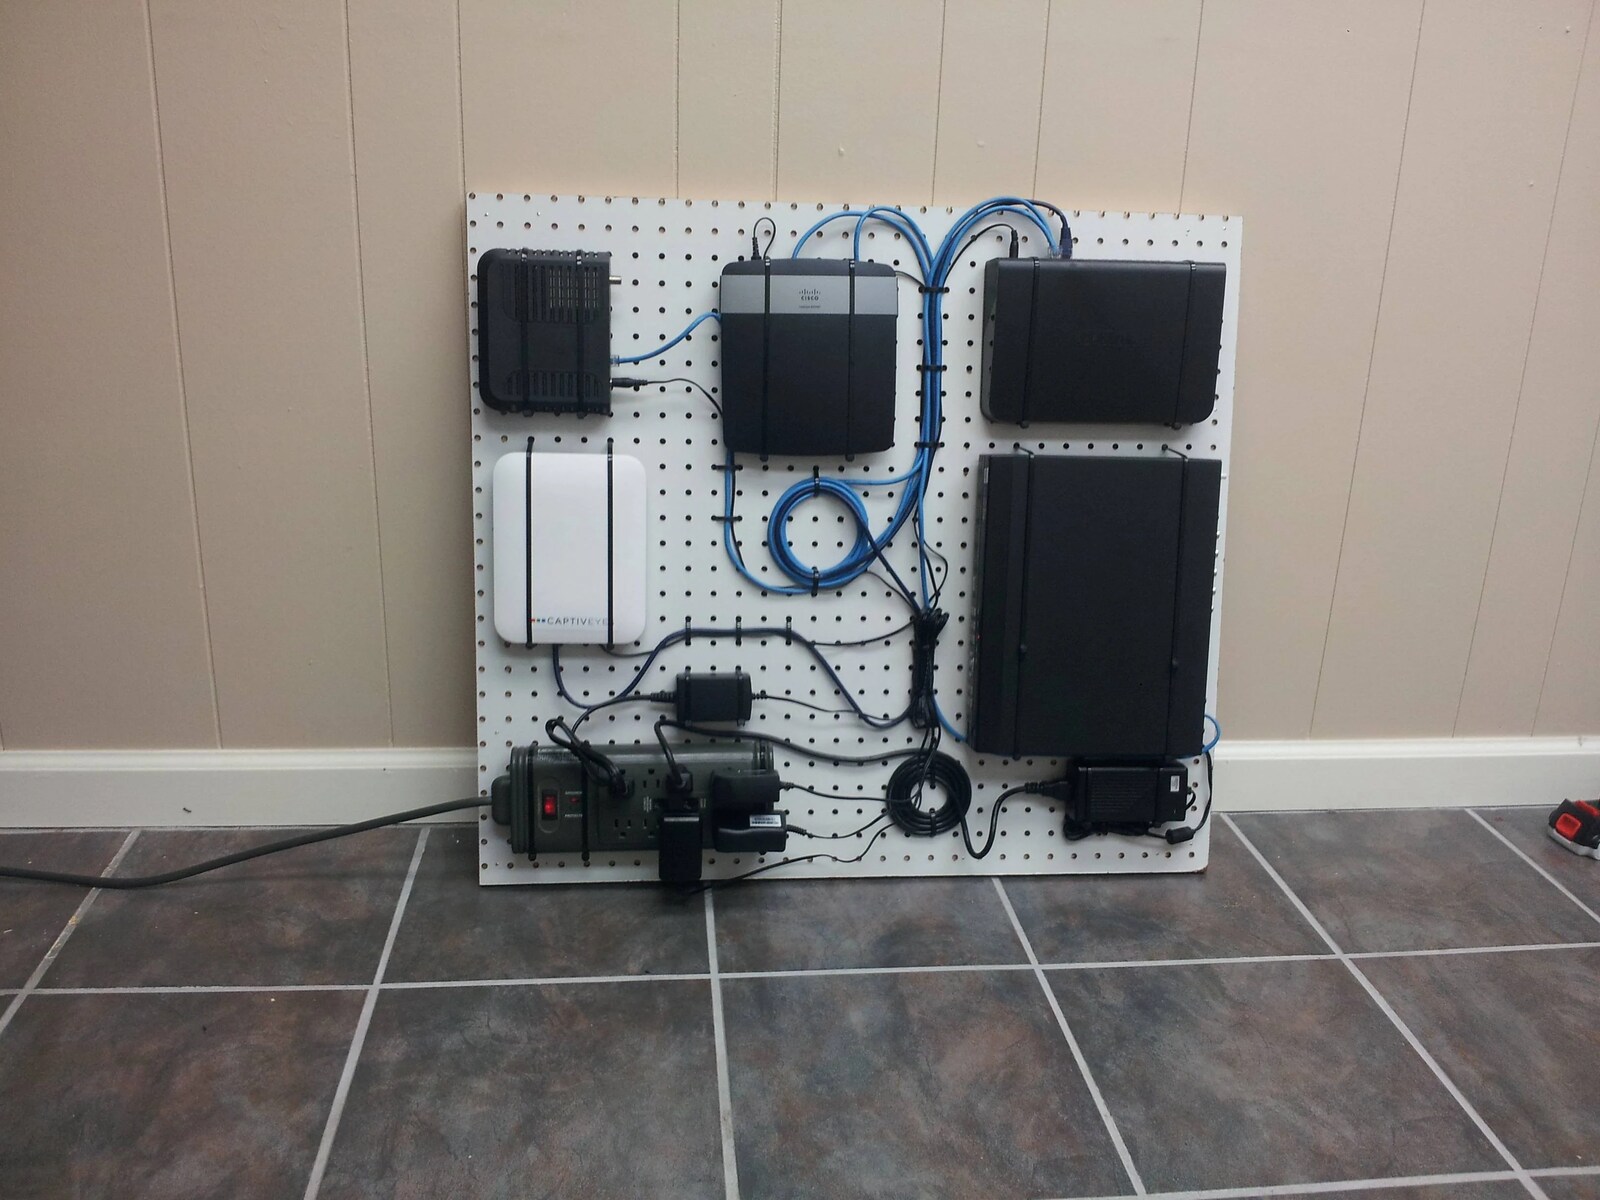 How To Put A Network Switch In The Wall